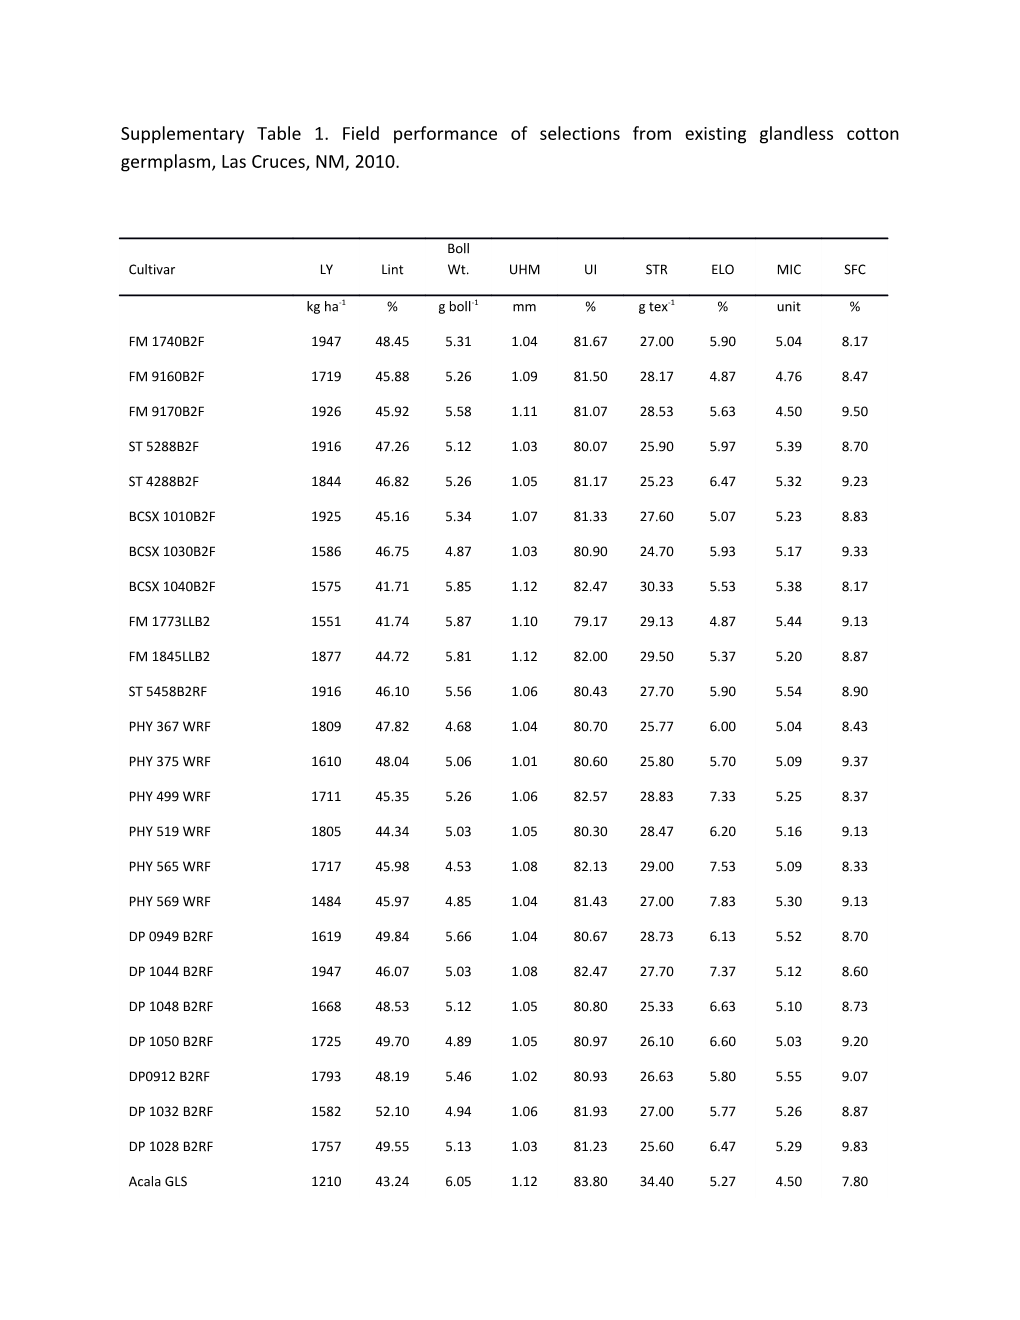 Supplementary Table 1. Field Performance of Selections from Existing Glandless Cotton Germplasm